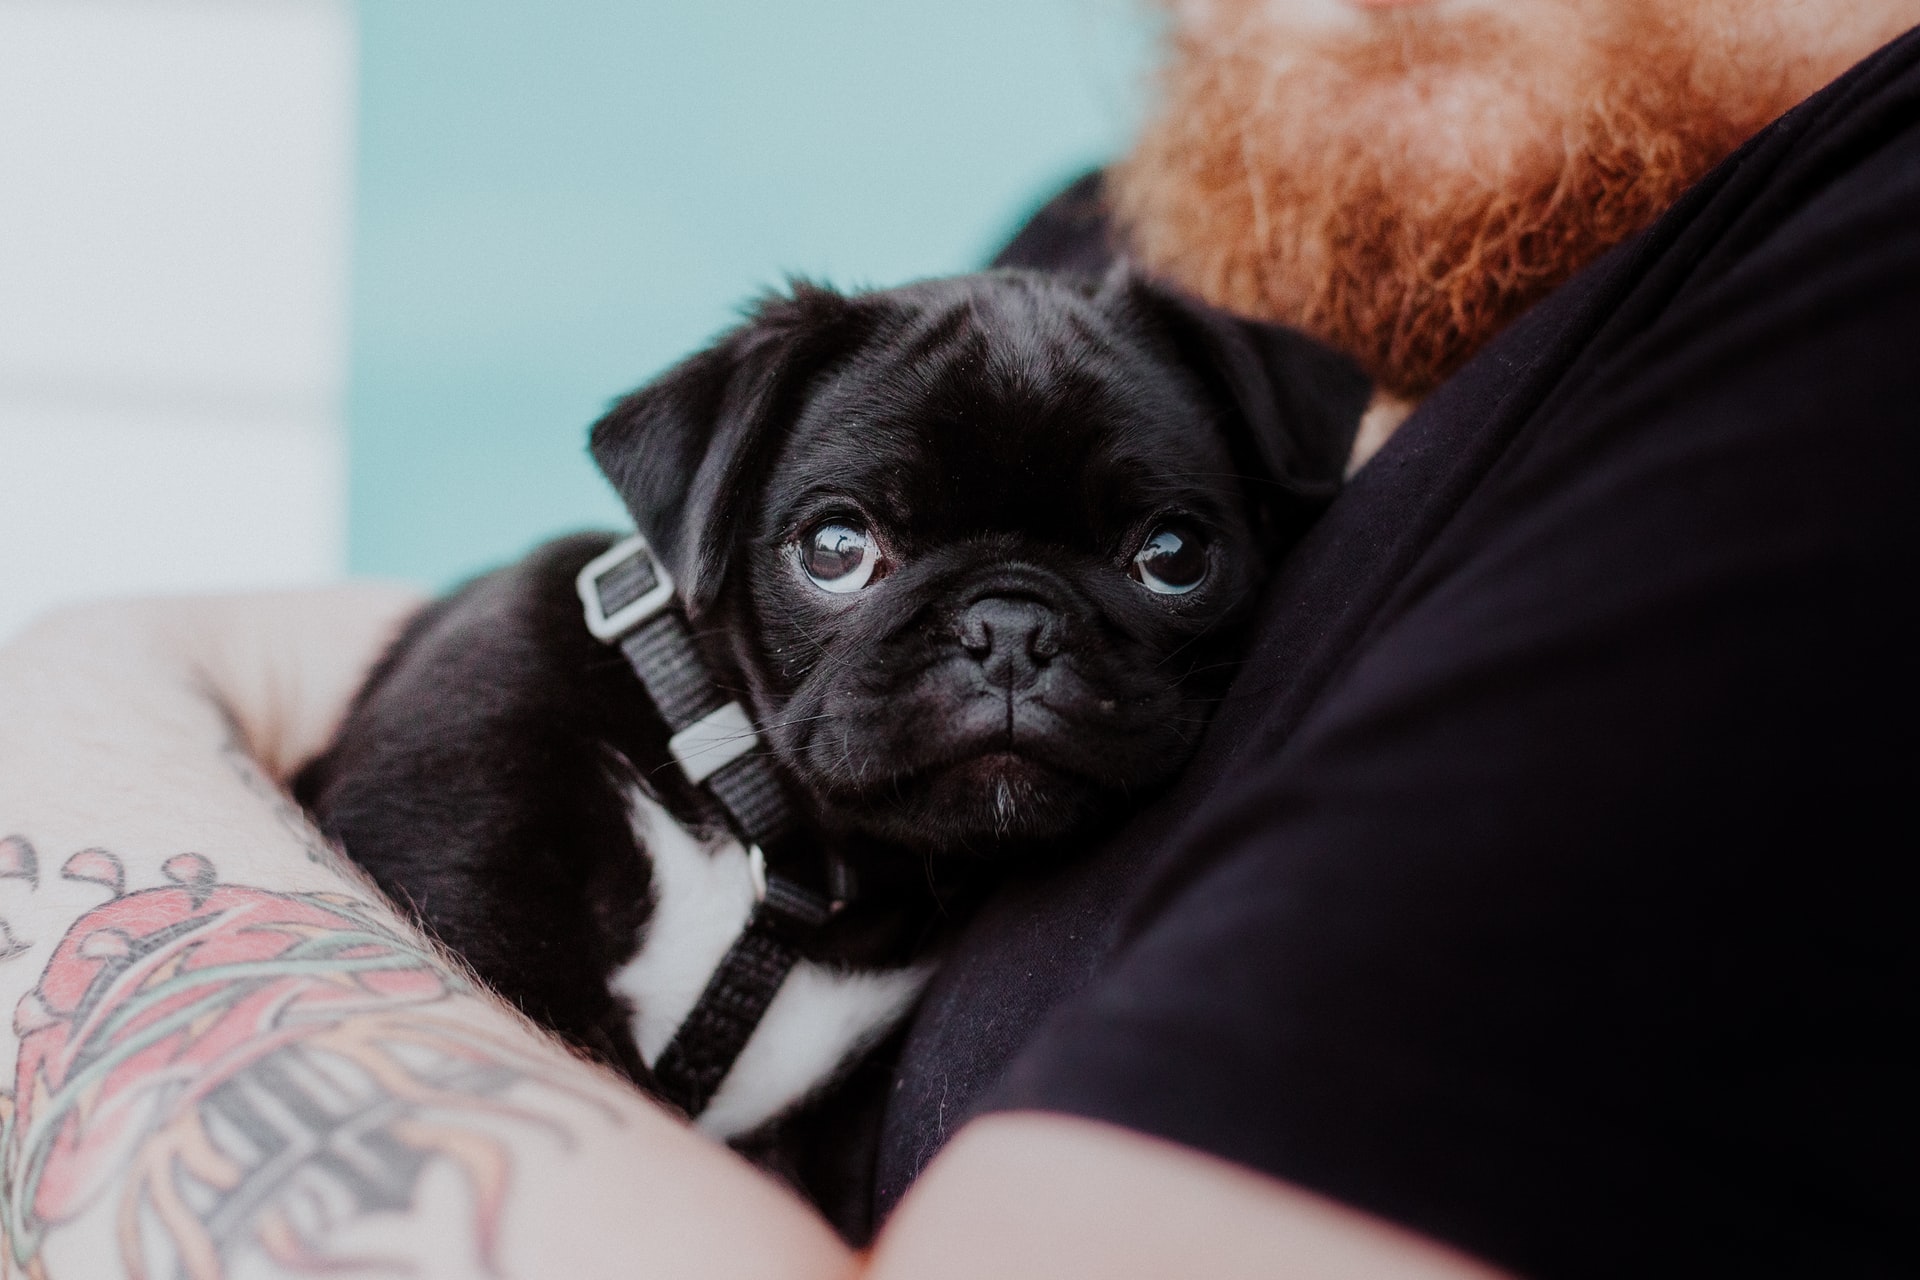 A small black pug is held in its owners arms.